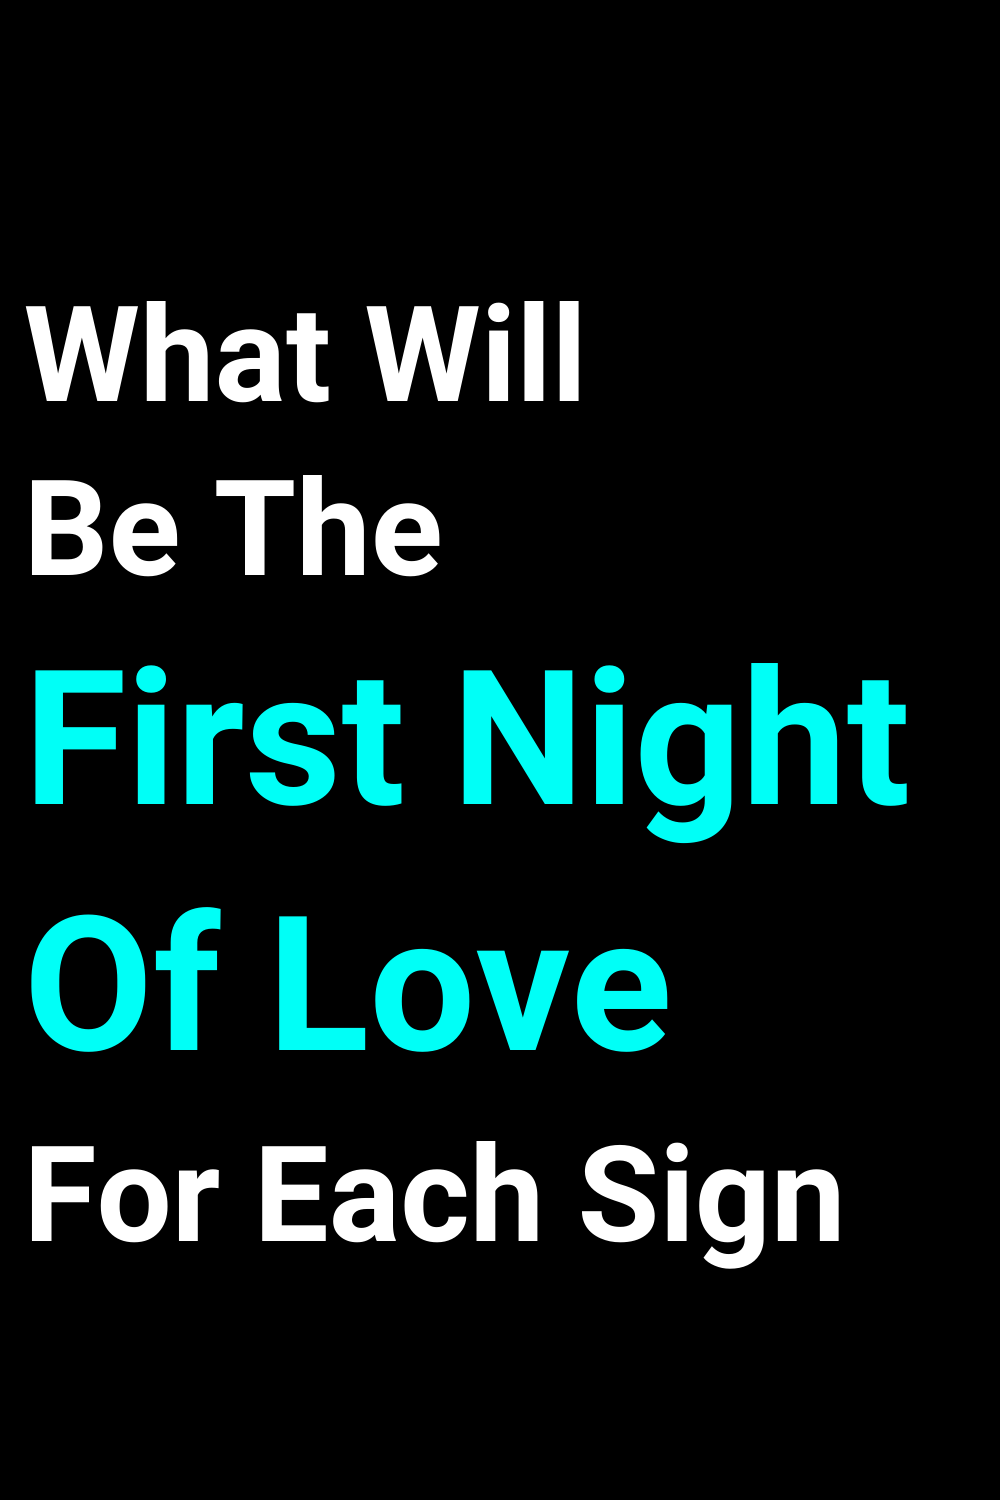 What Will Be The First Night Of Love For Each Sign